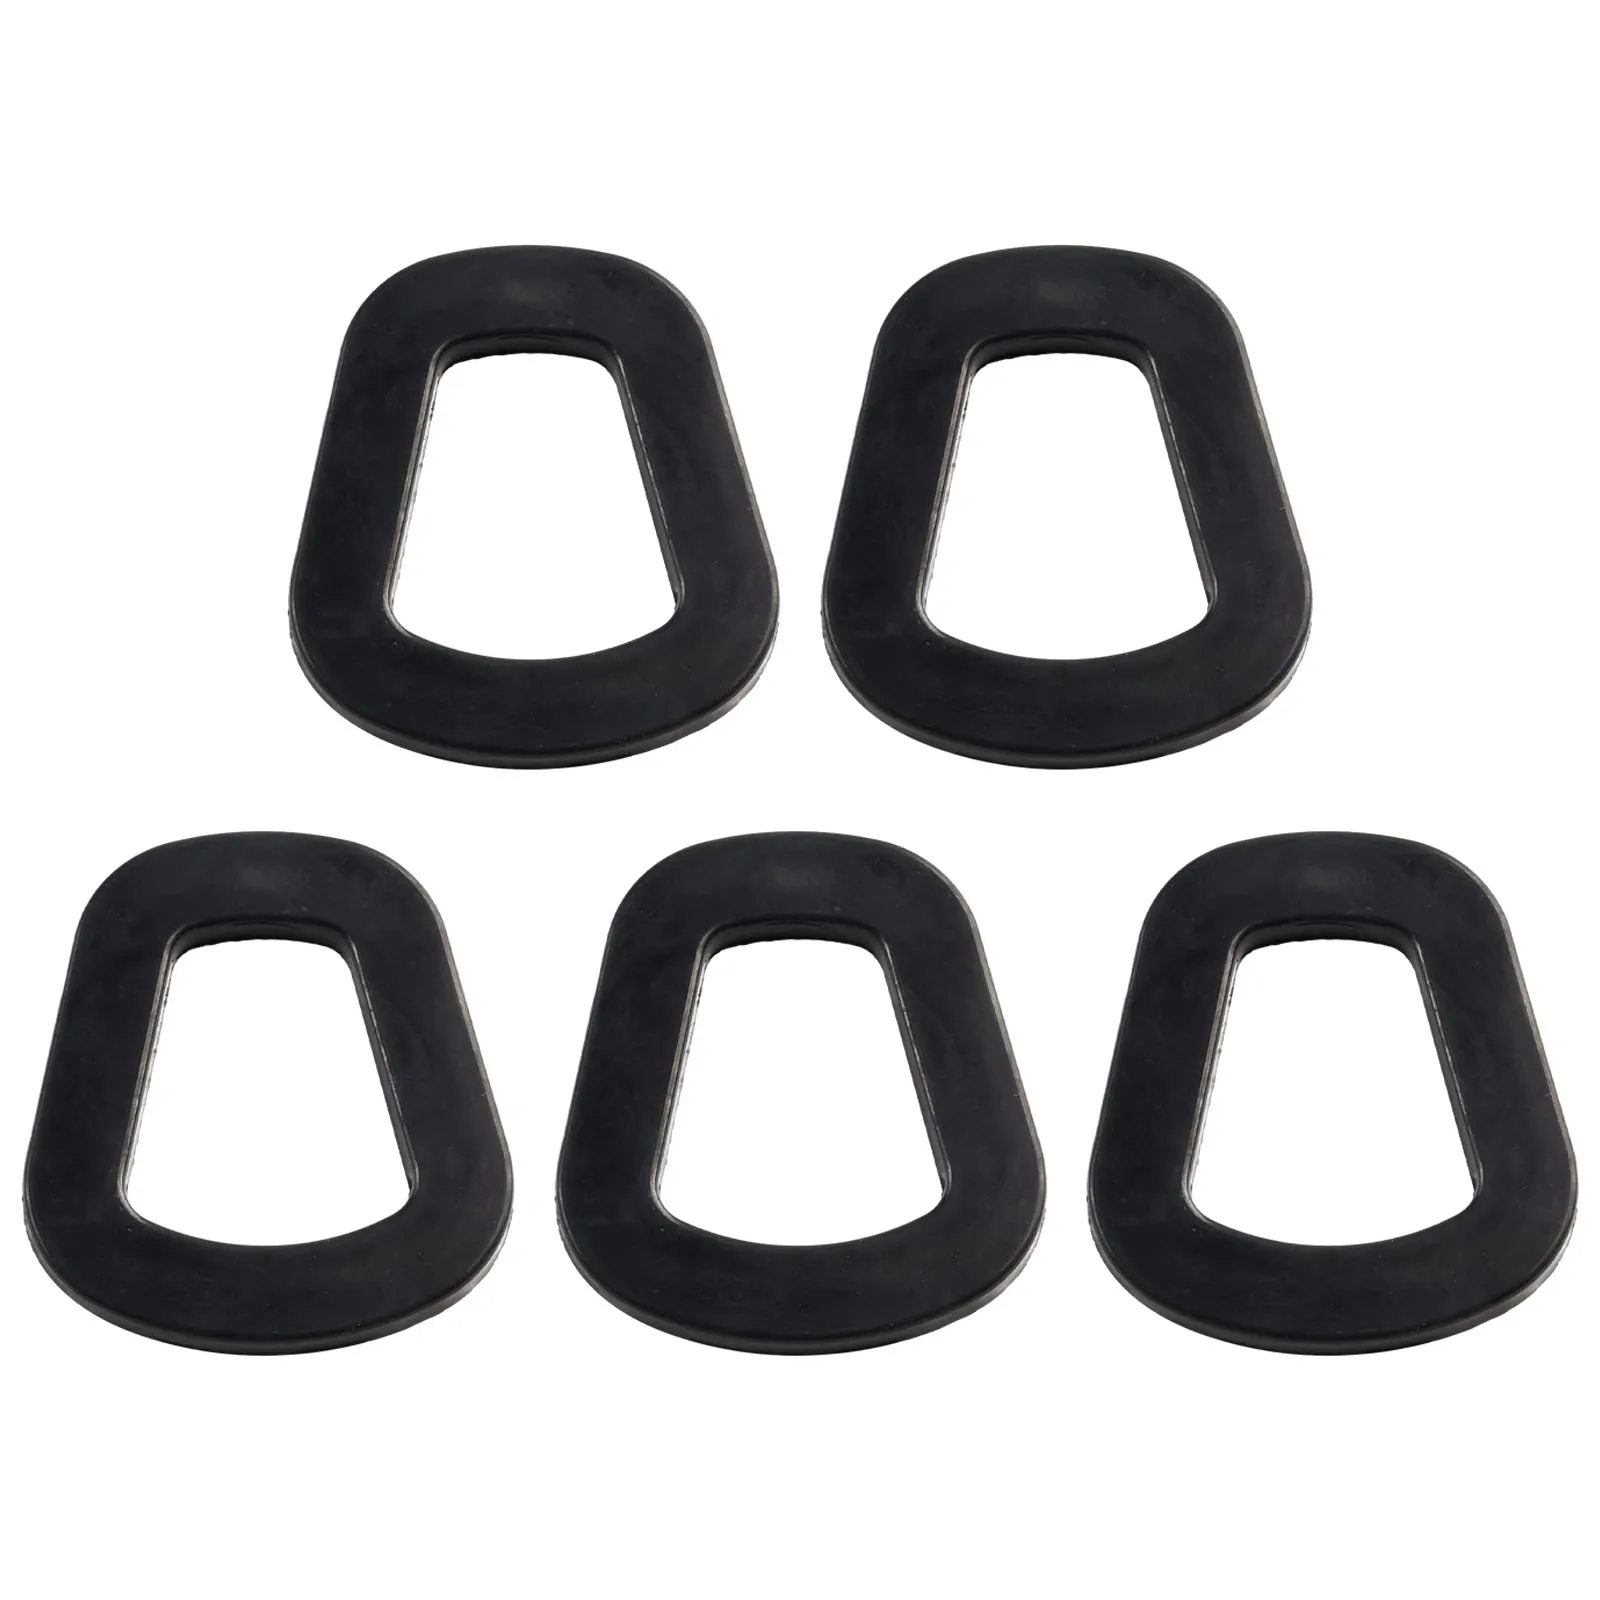 

Durable New Practical Petrol Fuel Seal Gasket Kit Pack Parts Replace Rubber Seal For 5/10/20 Litre For Petrol Canister